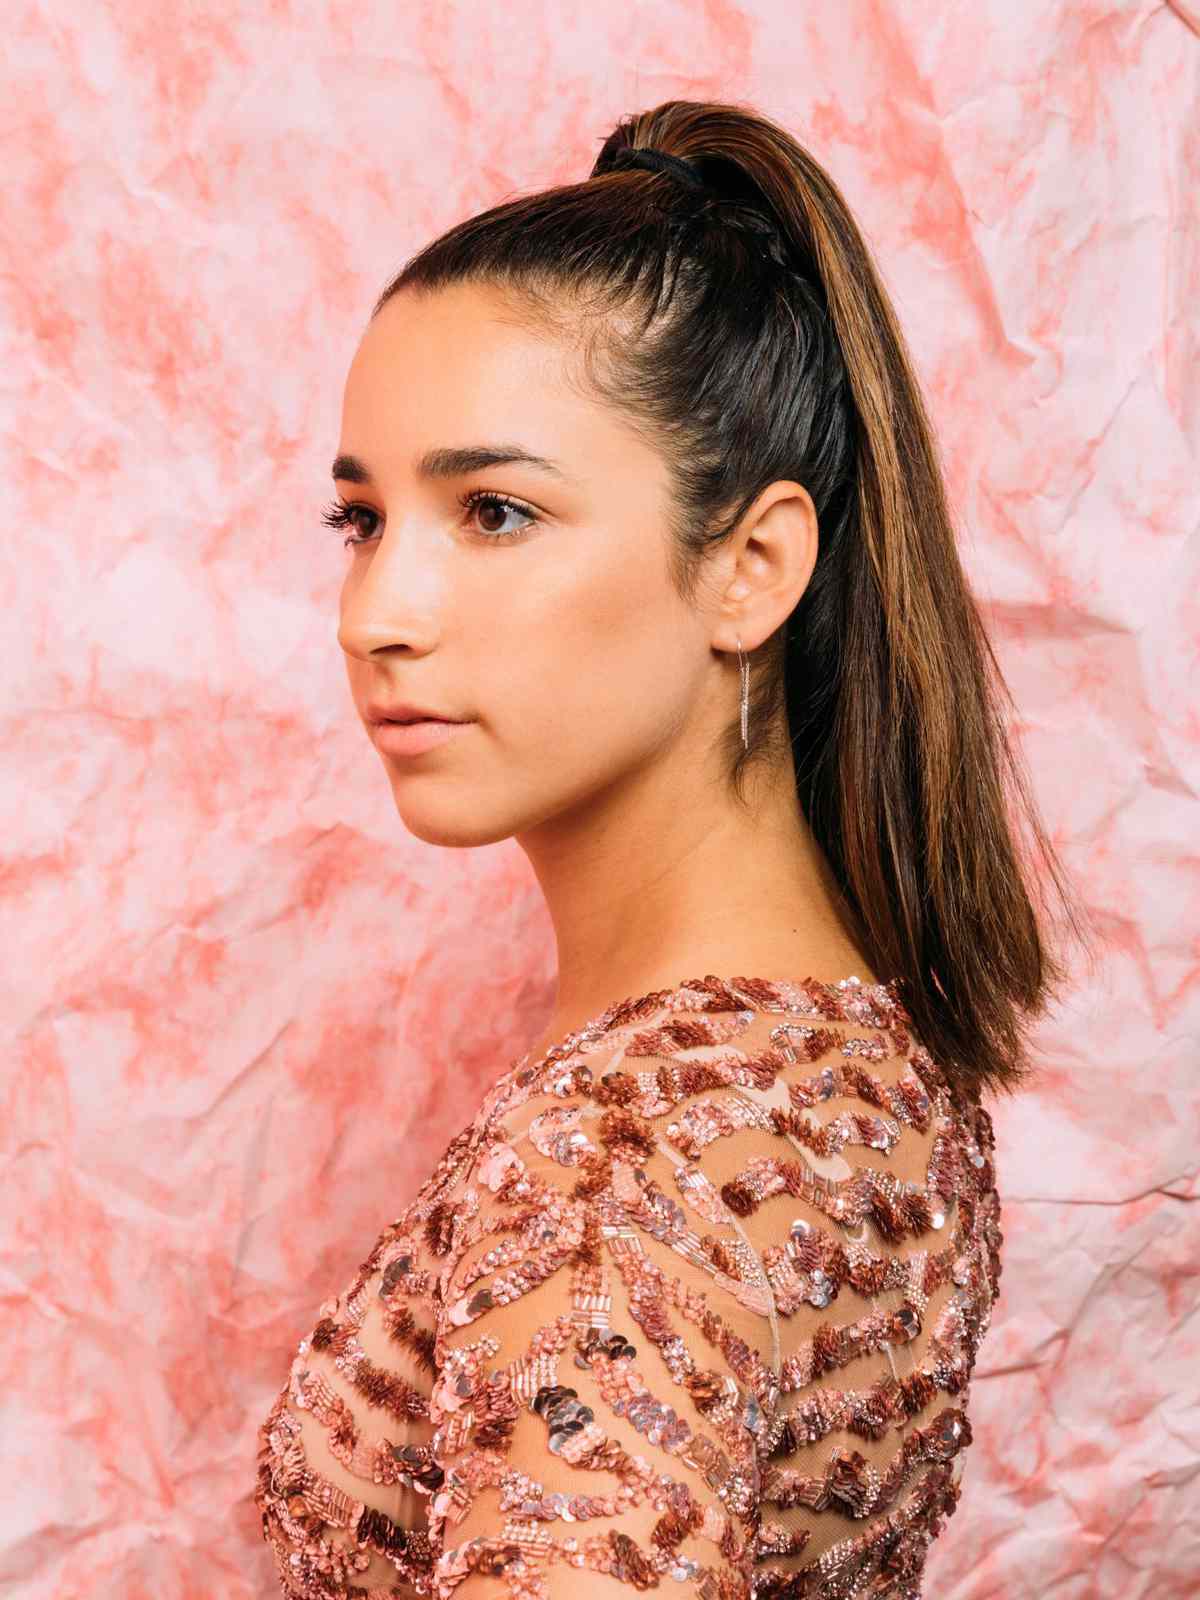 Aly raisman posed nude for the sports illustrated